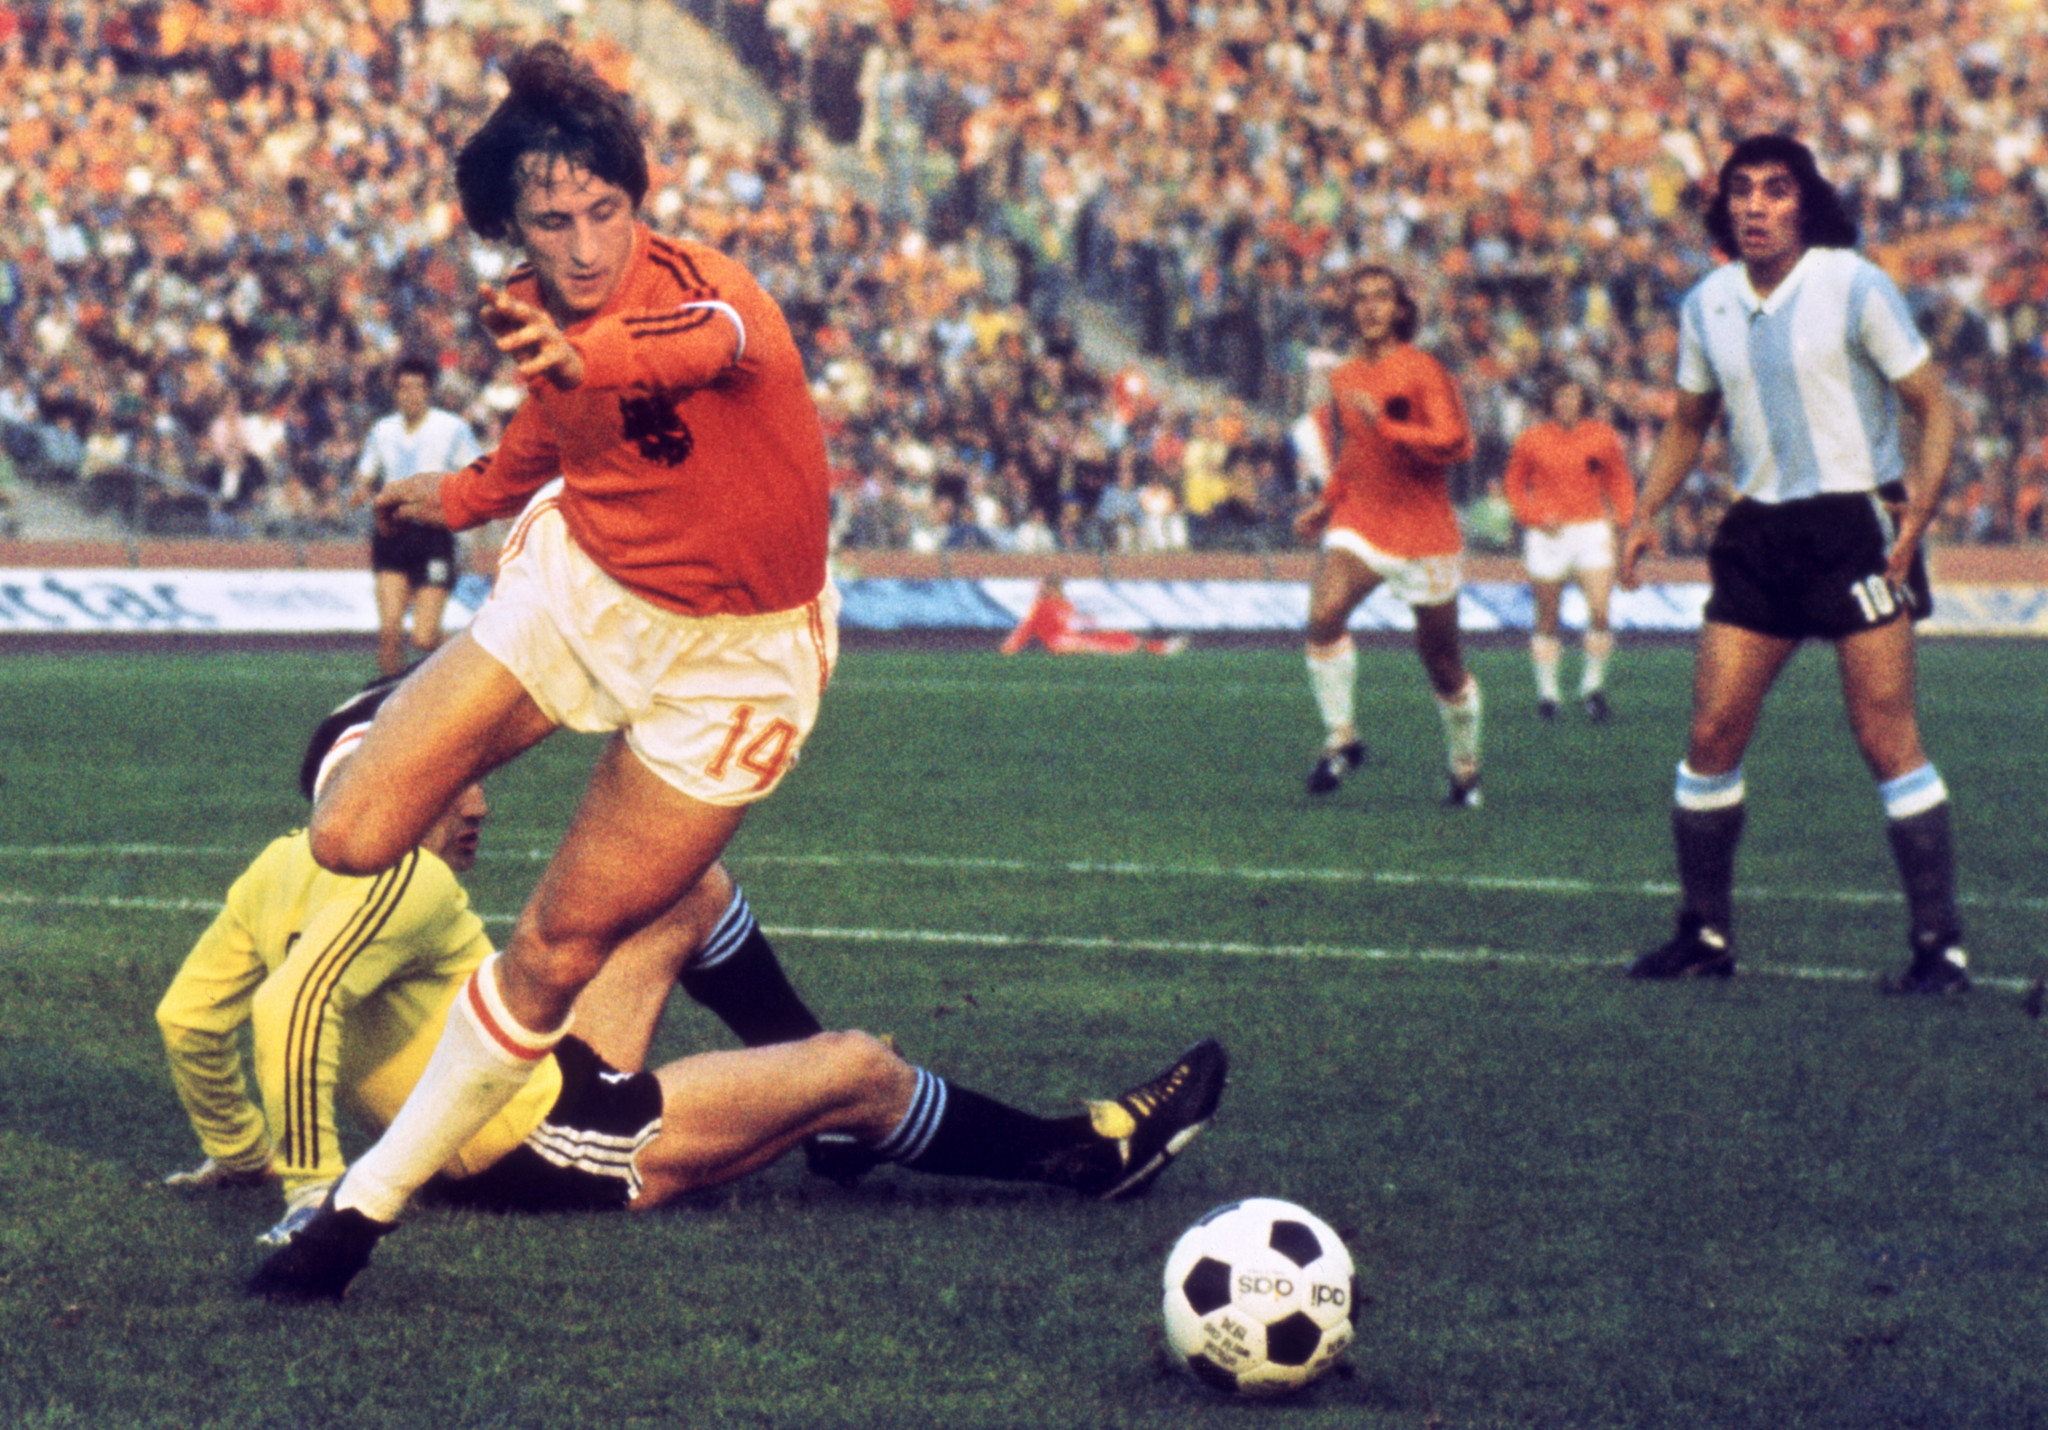 Johan Cruyff led The Netherlands to the 1974 FIFA World Cup final in West Germany ©Getty Images